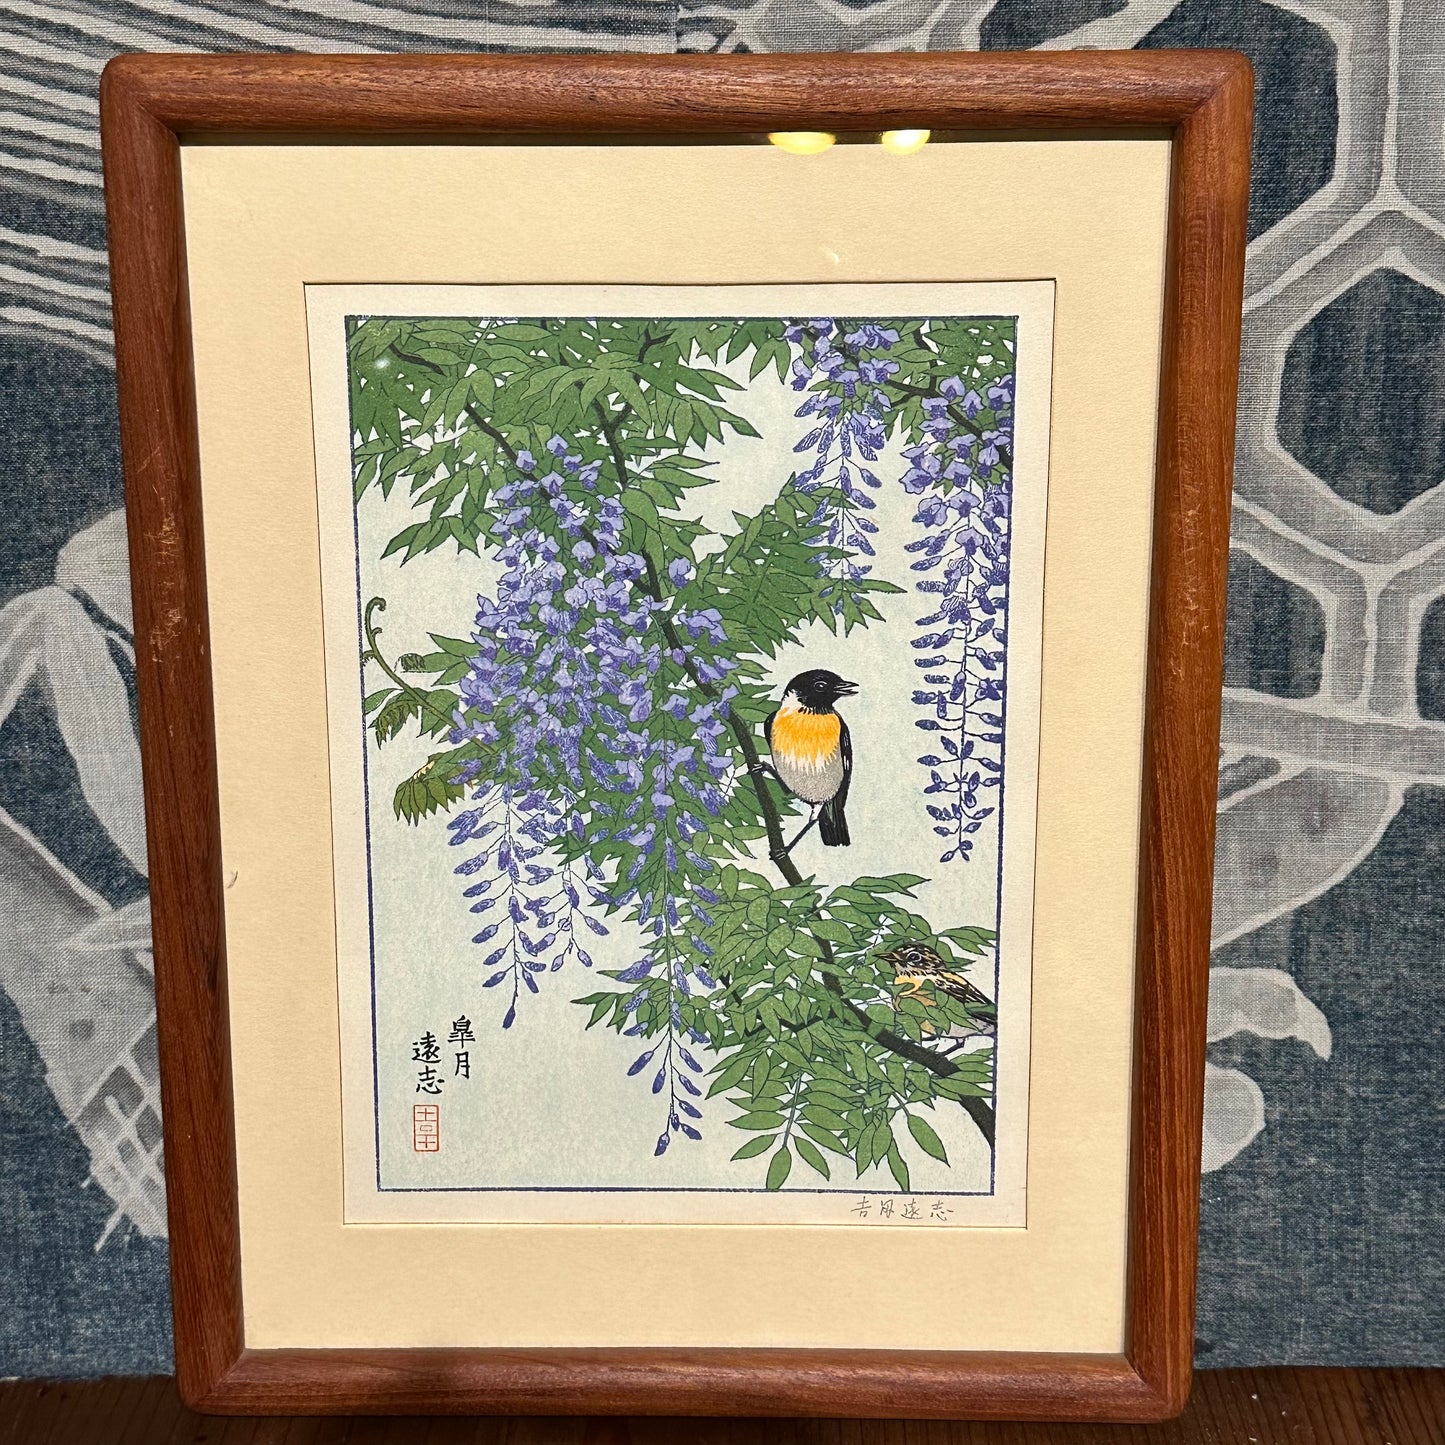 Toshi Yoshida Woodblock Print "Flowers & Birds" Very Rare Complete Set of 12 Months Signed